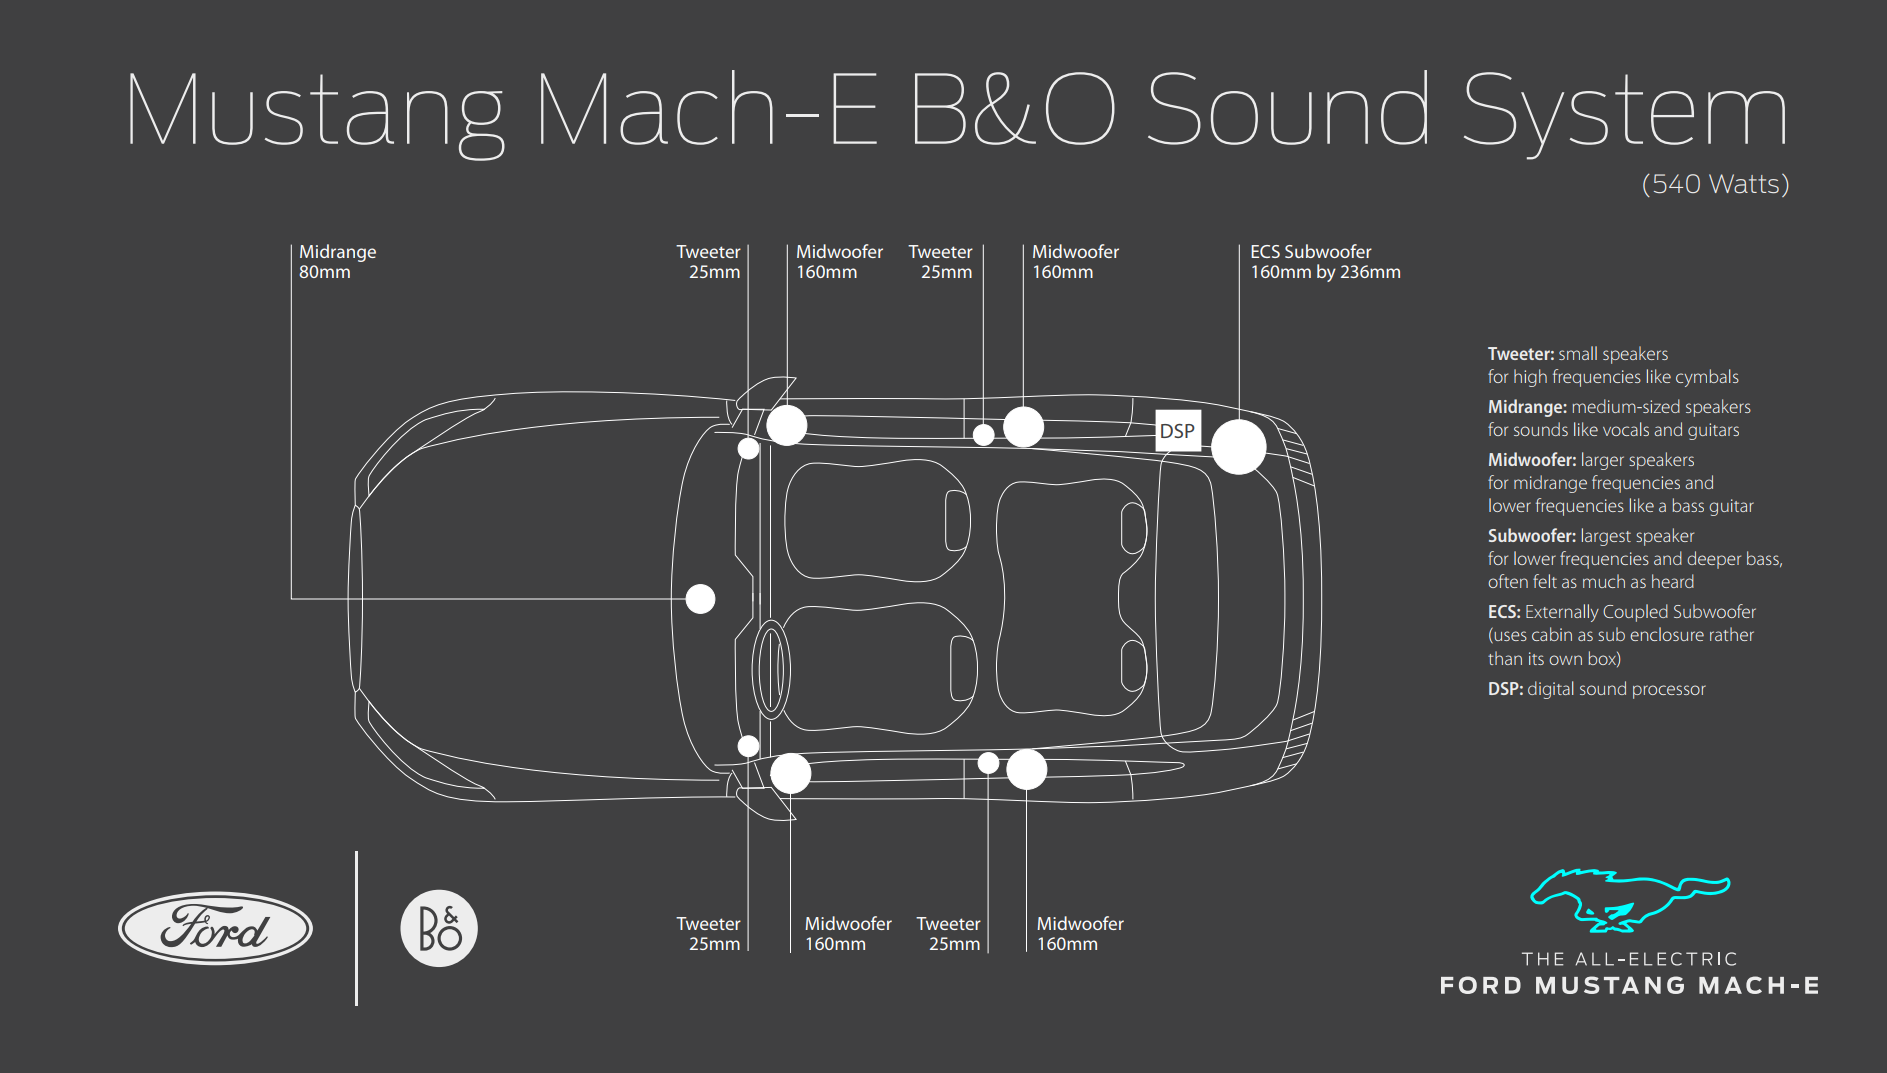 S650 Mustang S650 Aftermarket Sound System speaker locations